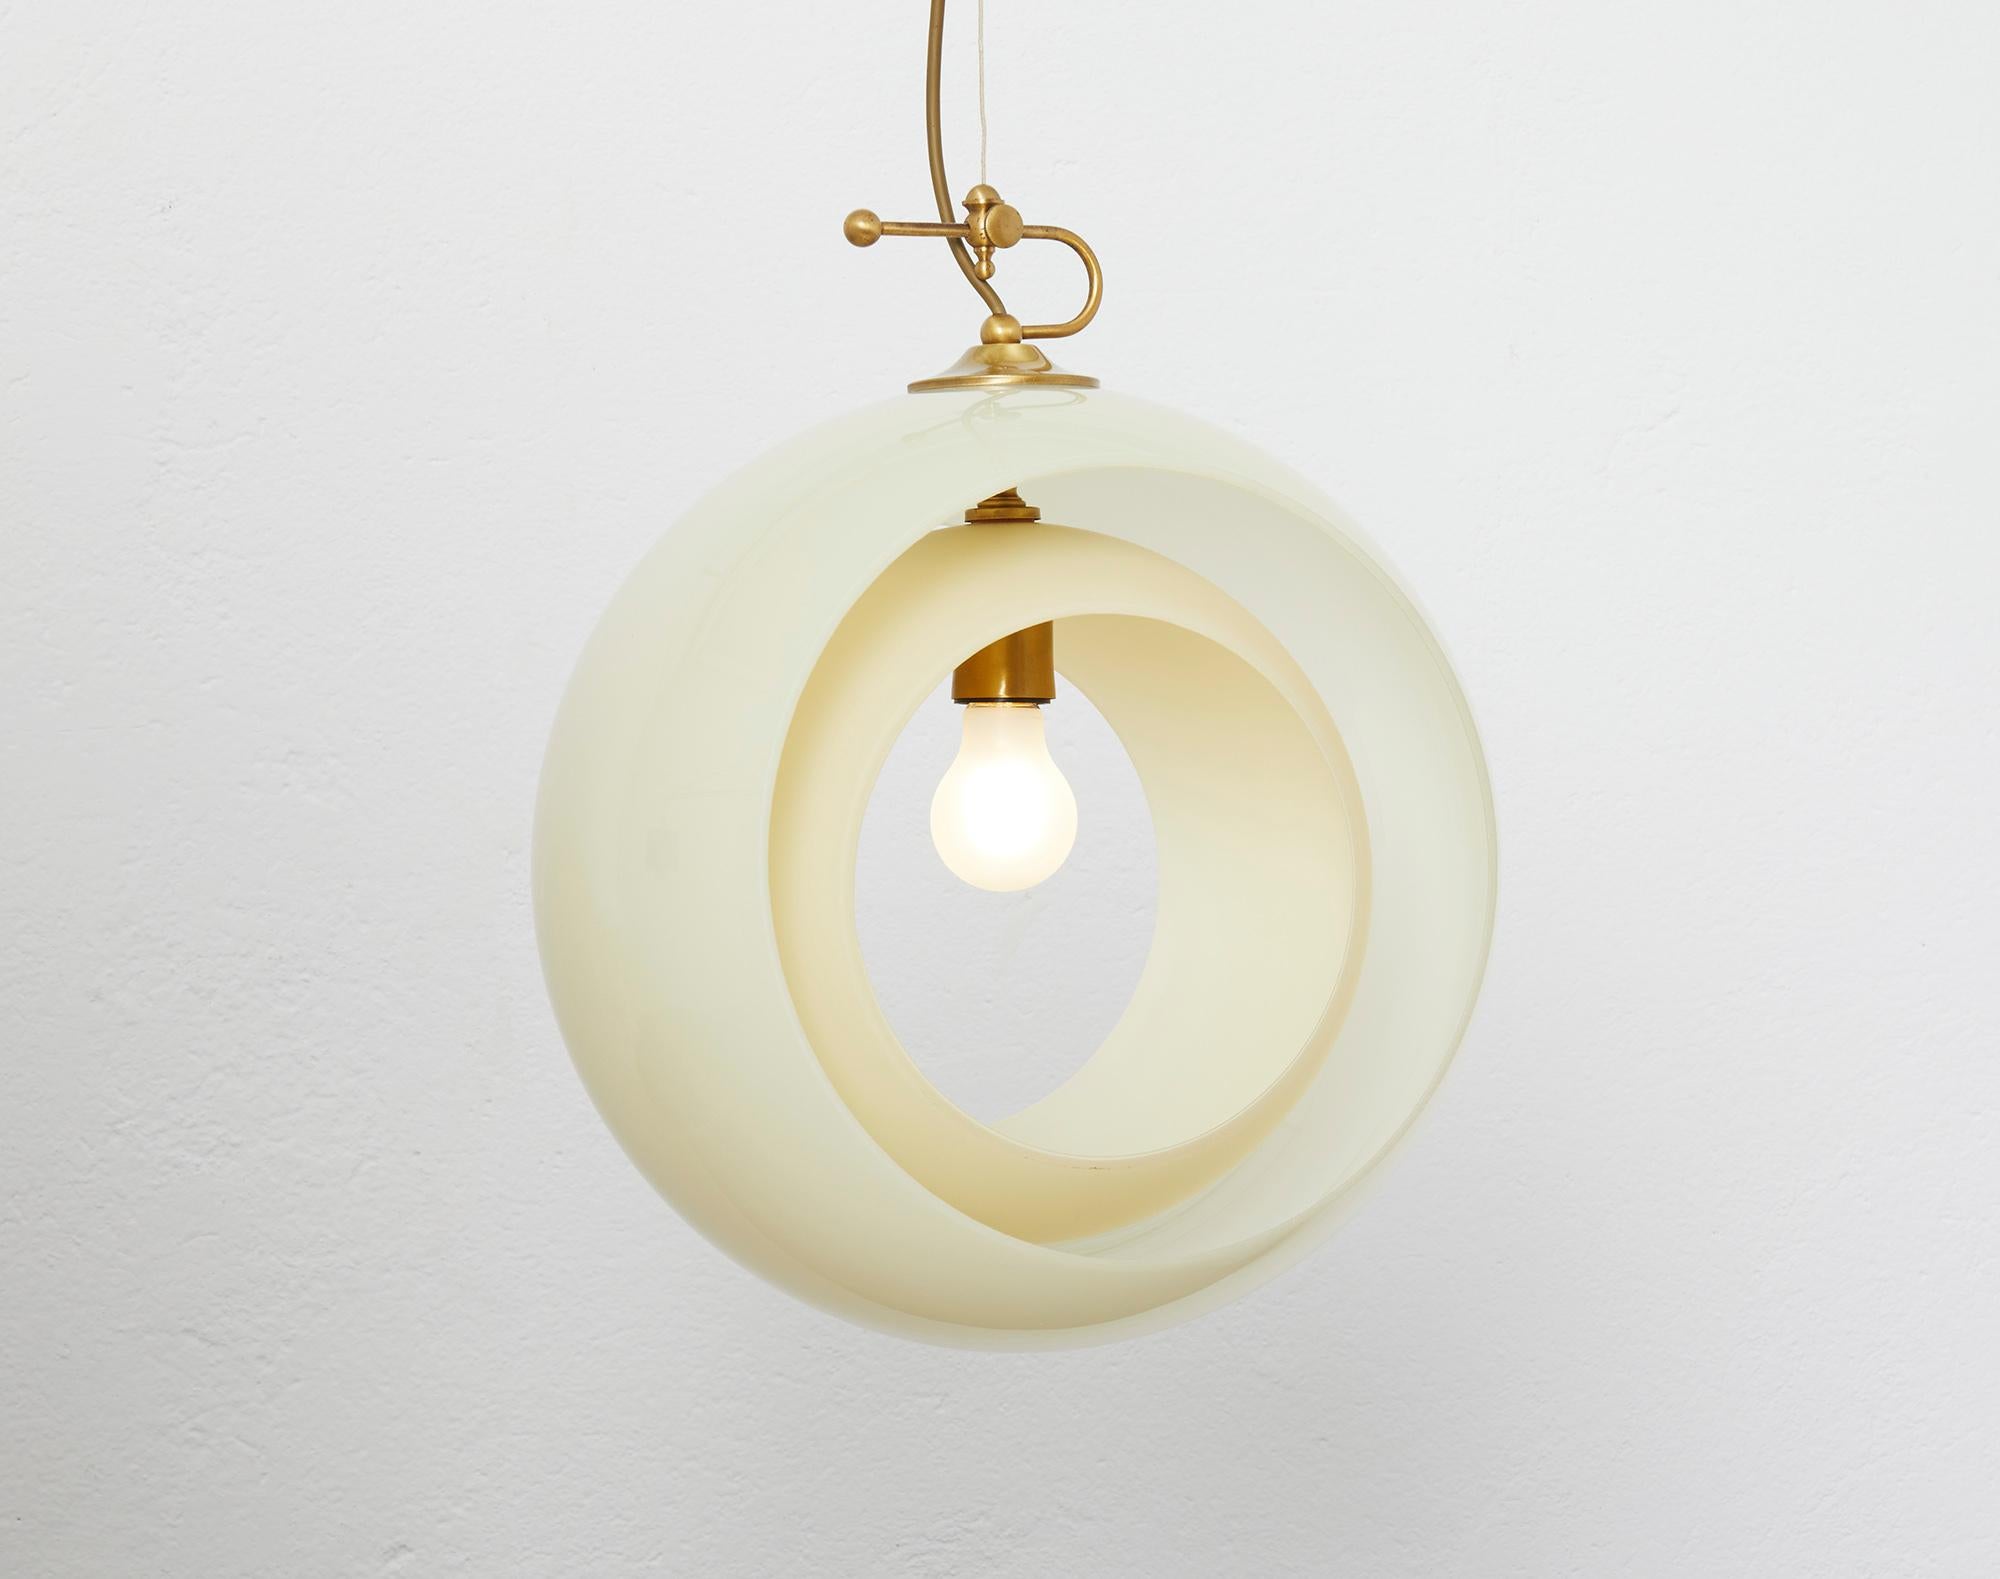 Rare Eclisse model pendant lamp by the Italian master glassmaker Carlo Nason for Vistosi 1960.

Inspired by lunar and solar eclipses and composed of two cream-colored Murano glass diffusers.

The diffusers can be rotated on the axis to vary the